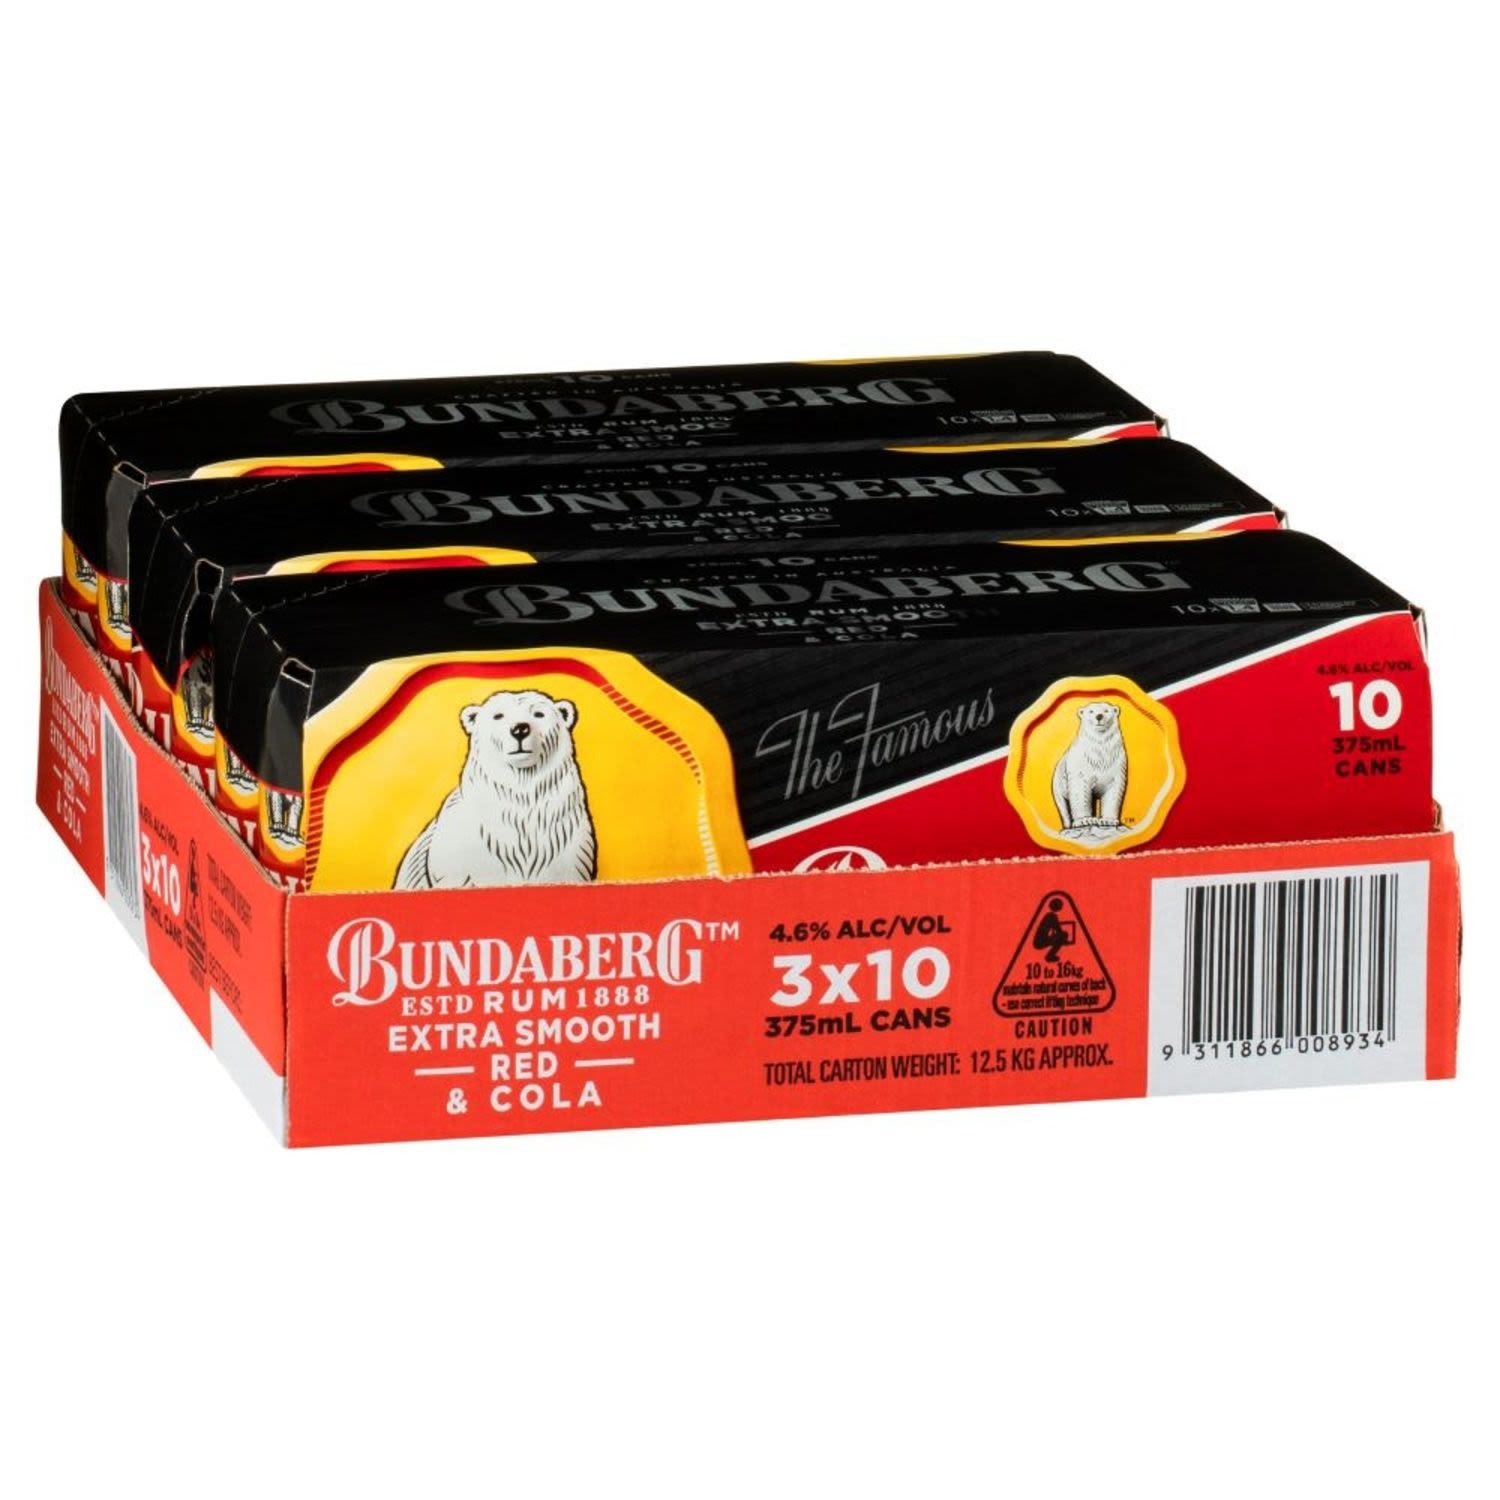 Bundaberg Extra Smooth Red Rum & Cola Can 375mL 30 Pack